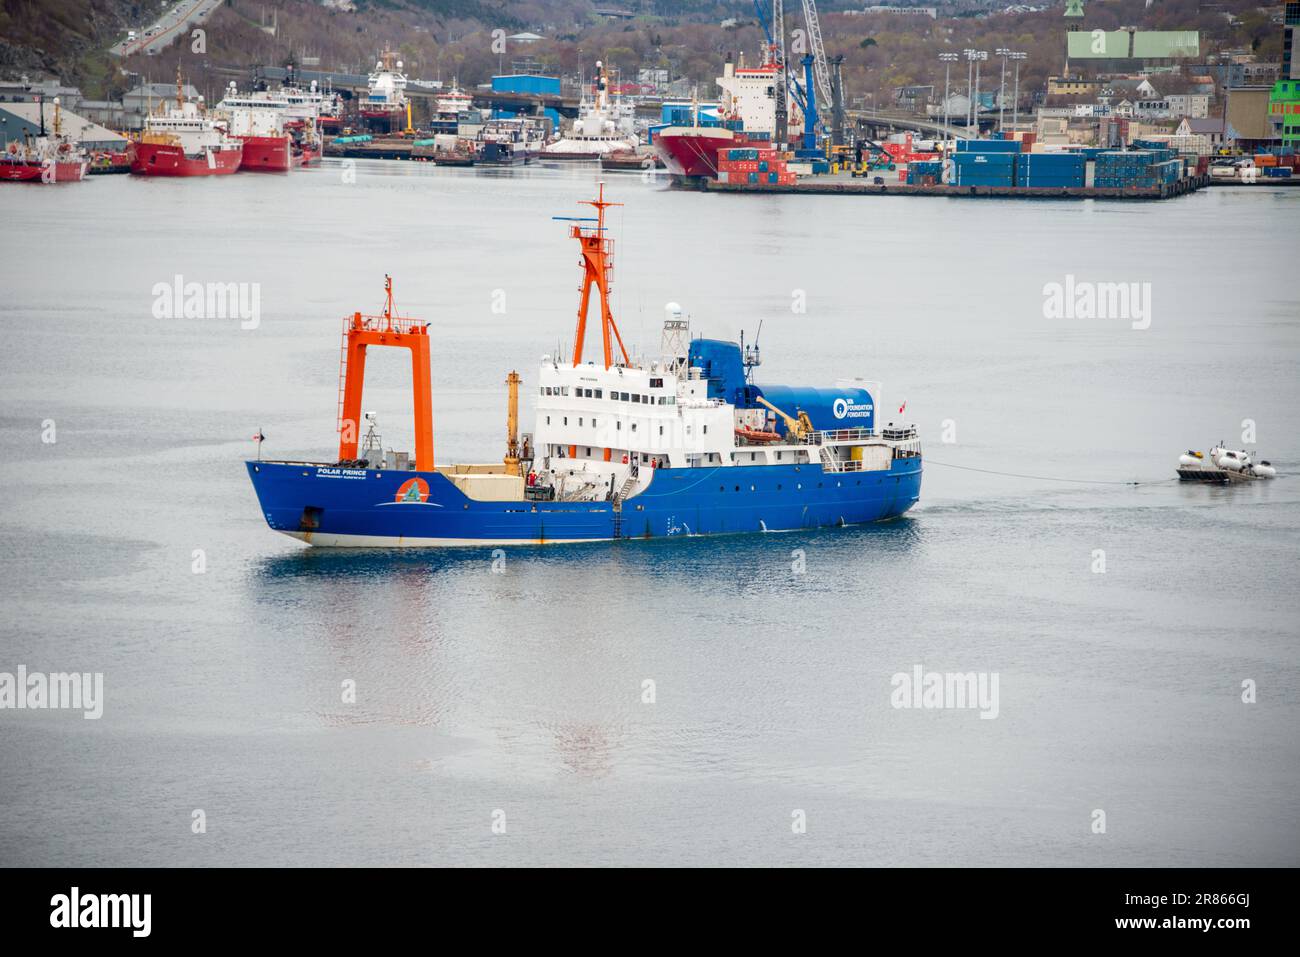 St. John's, Newfoundland, Canada- OceanGate, Polar Prince towing Titan Titanic Expeditions submersible vessels on a barge for a tour of the Titanic. Stock Photo